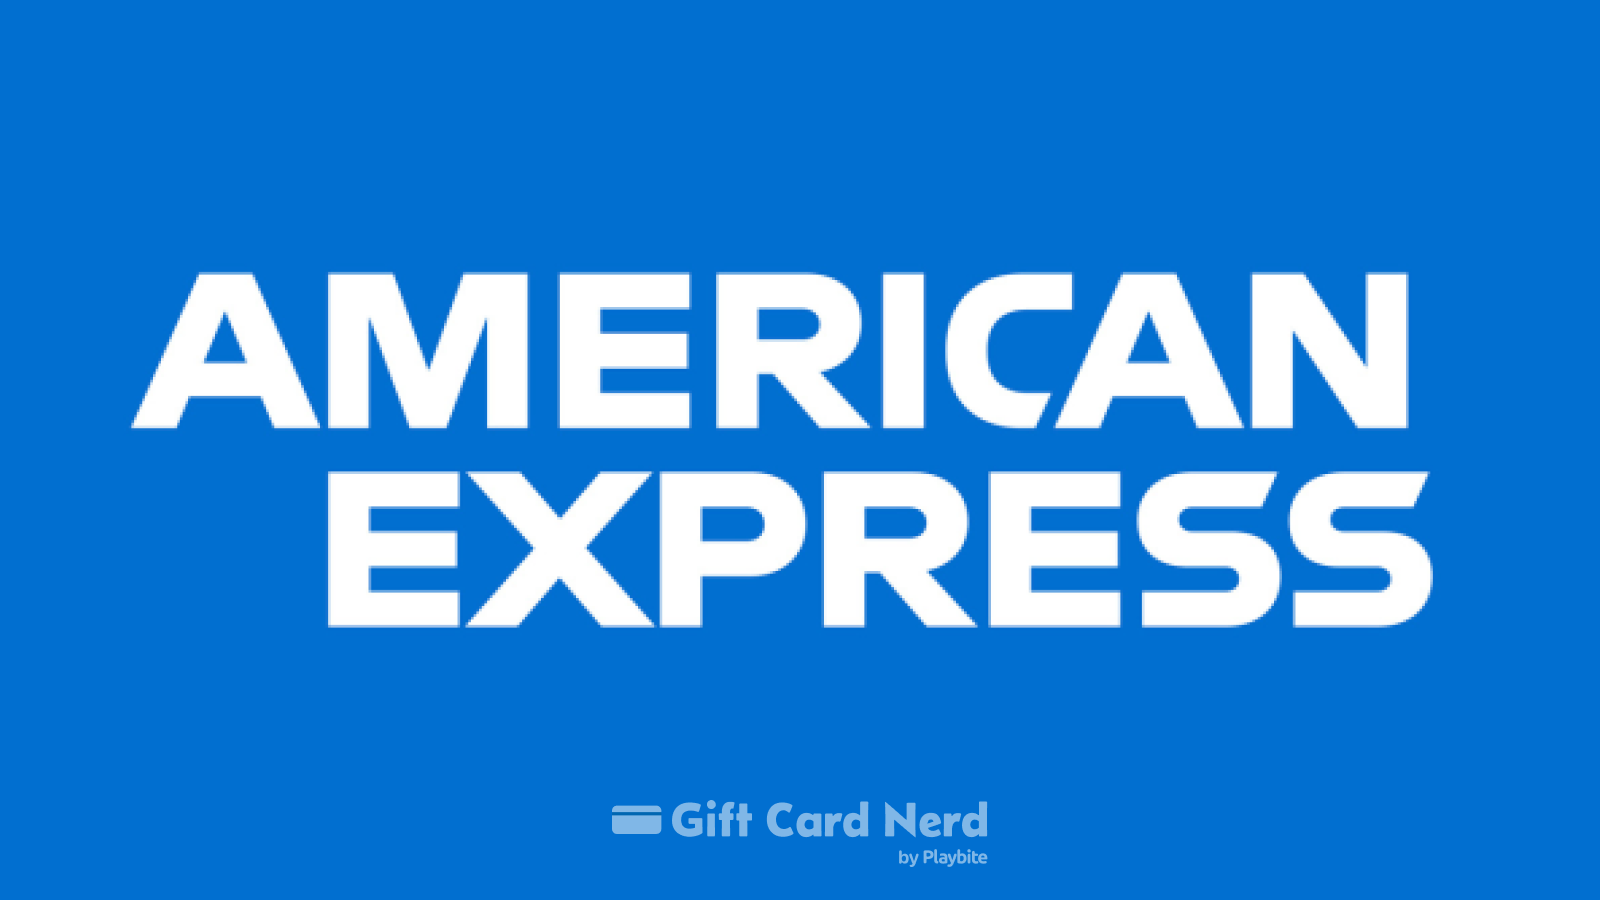 Can I Use an Amex Gift Card on Cash App?